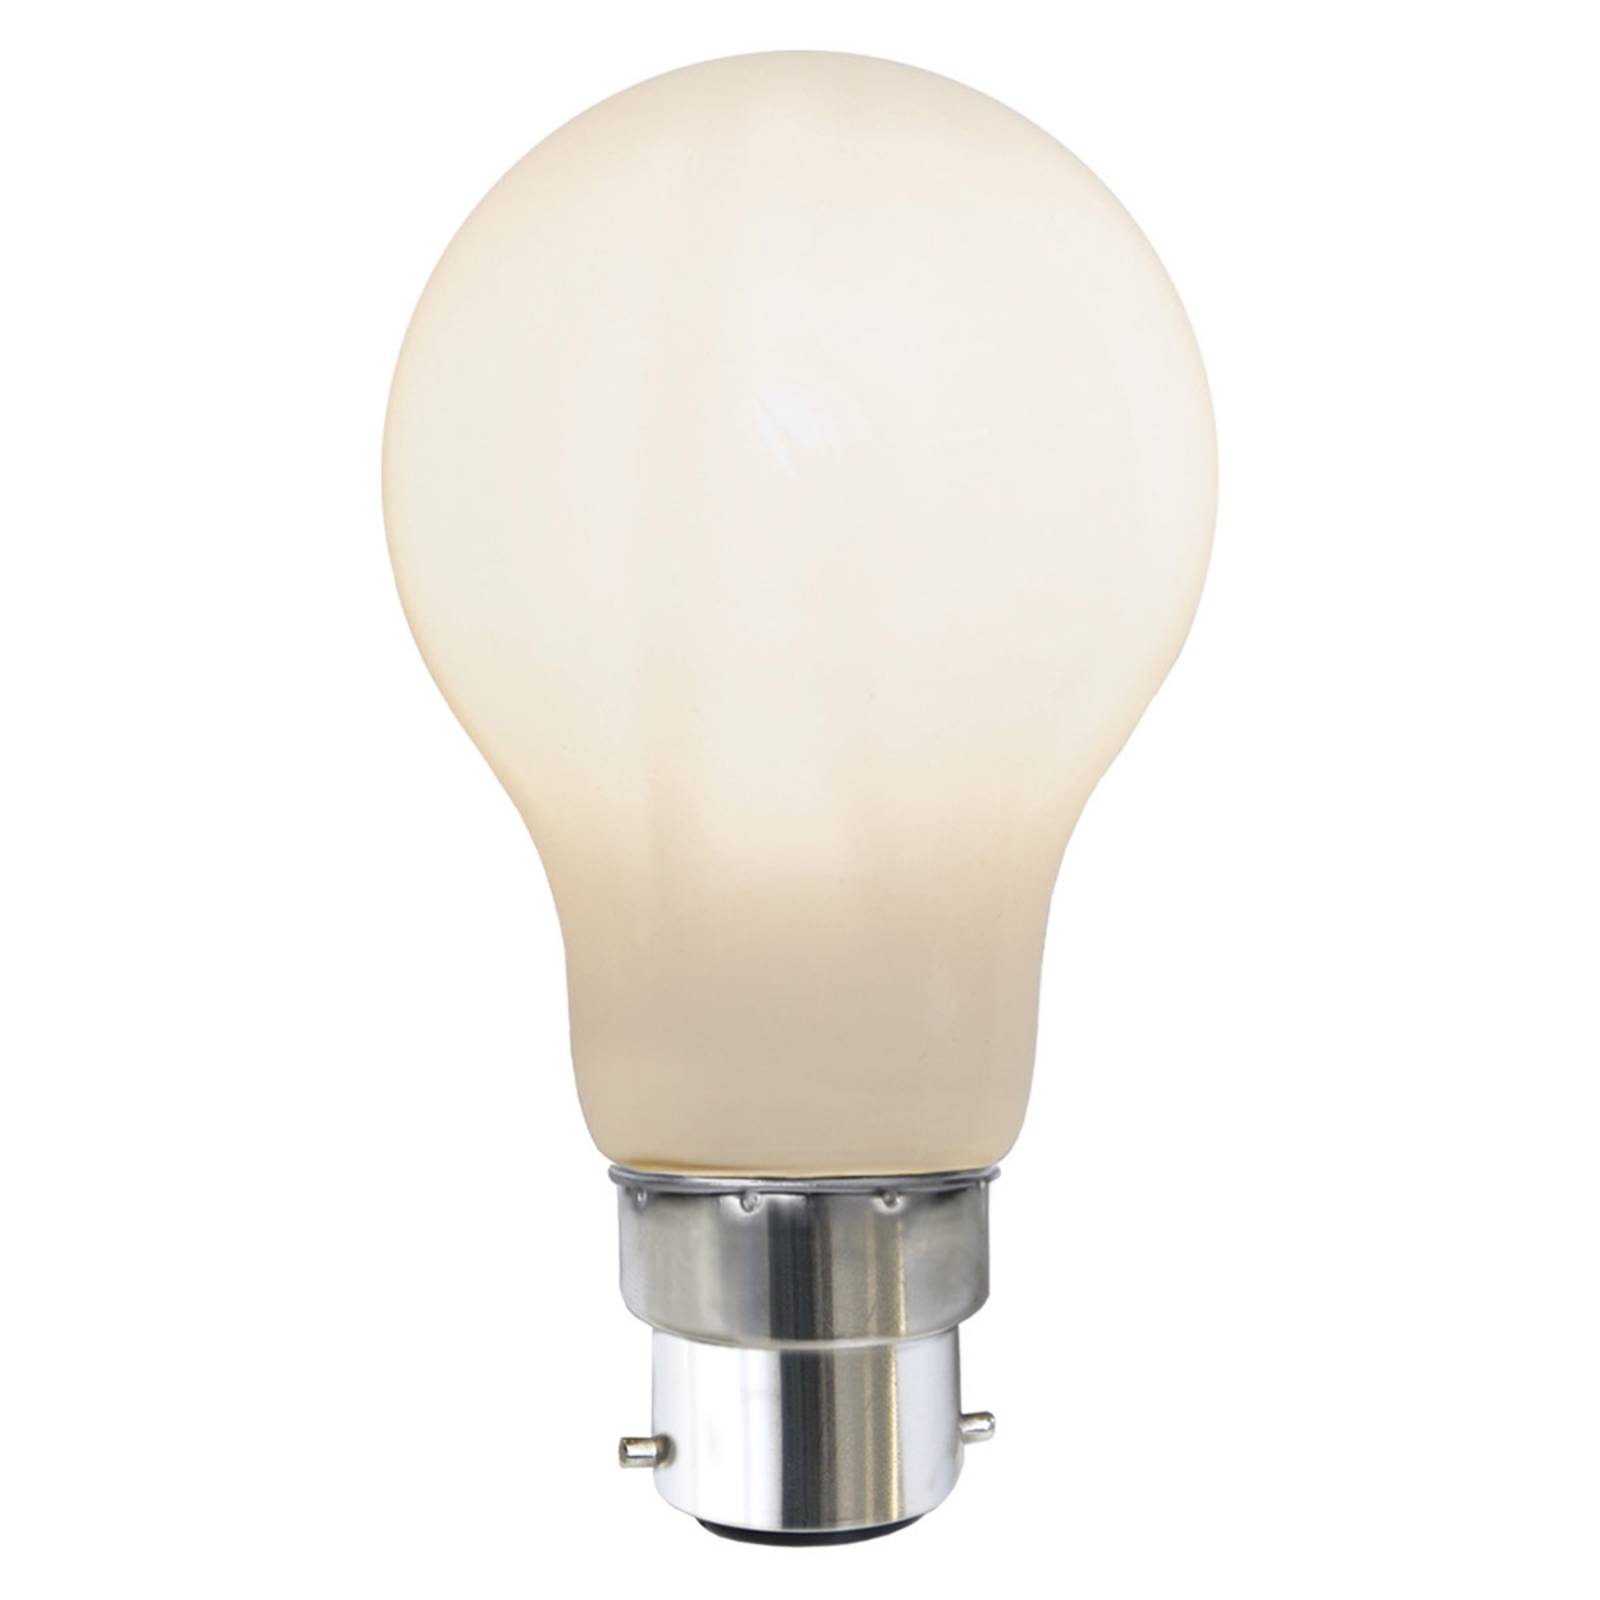 Image of STAR TRADING Ampoule LED B22 7,5W 2.700K Ra90 opale 7391482036131